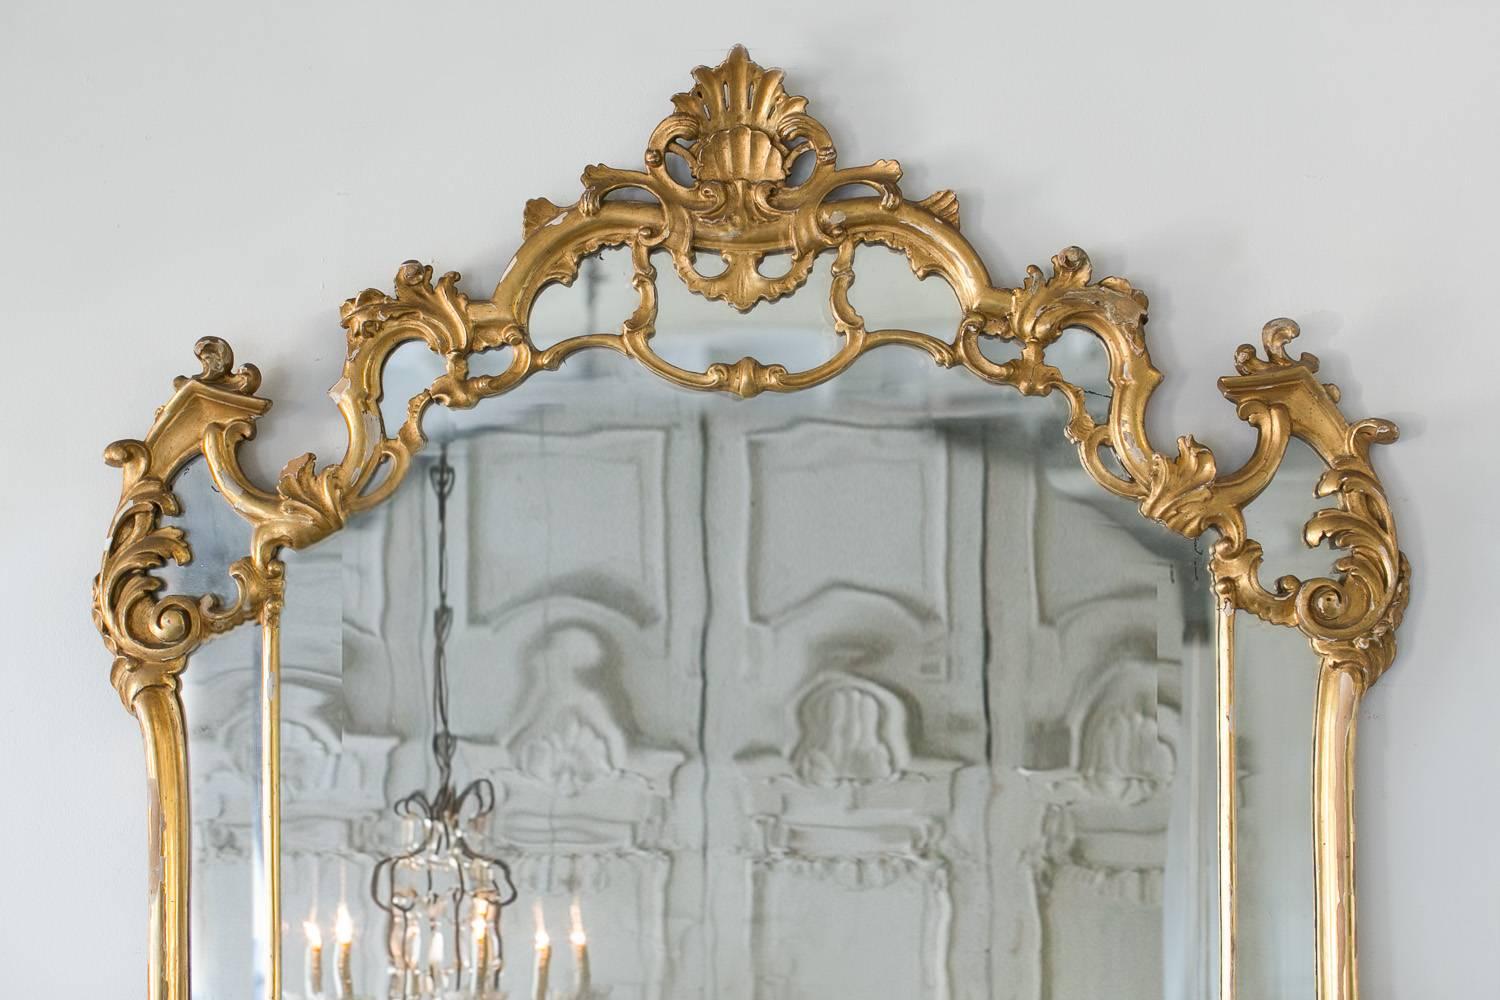 Regal antique mirror in muted gilt. Delicate carvings mimic the waves of the ocean leading to a shell motif at the height of the crest. The original glass comes with imperfection however the light scratches and distortion in parts add to the age of